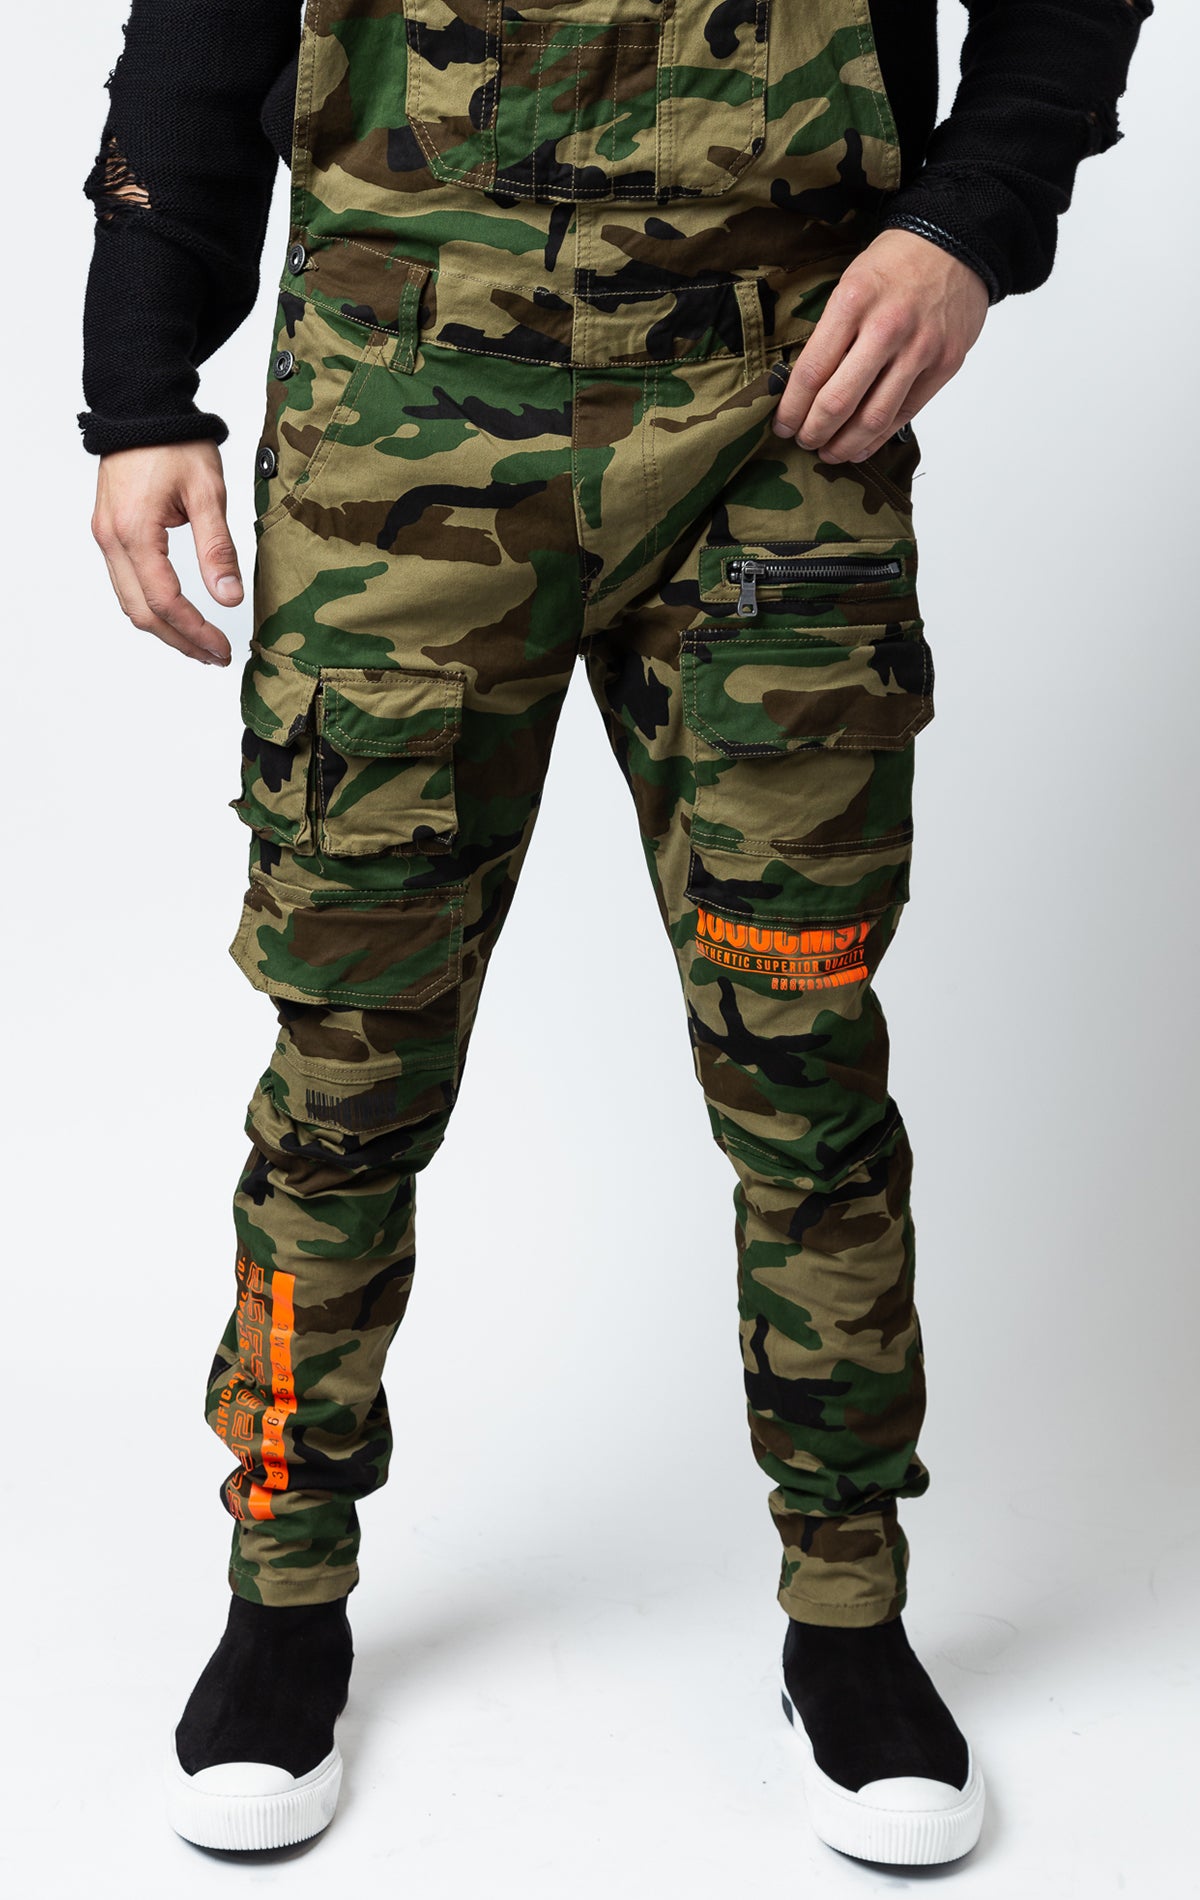 Camo Cotton twill overalls with cargo pockets and adjustable shoulder straps.